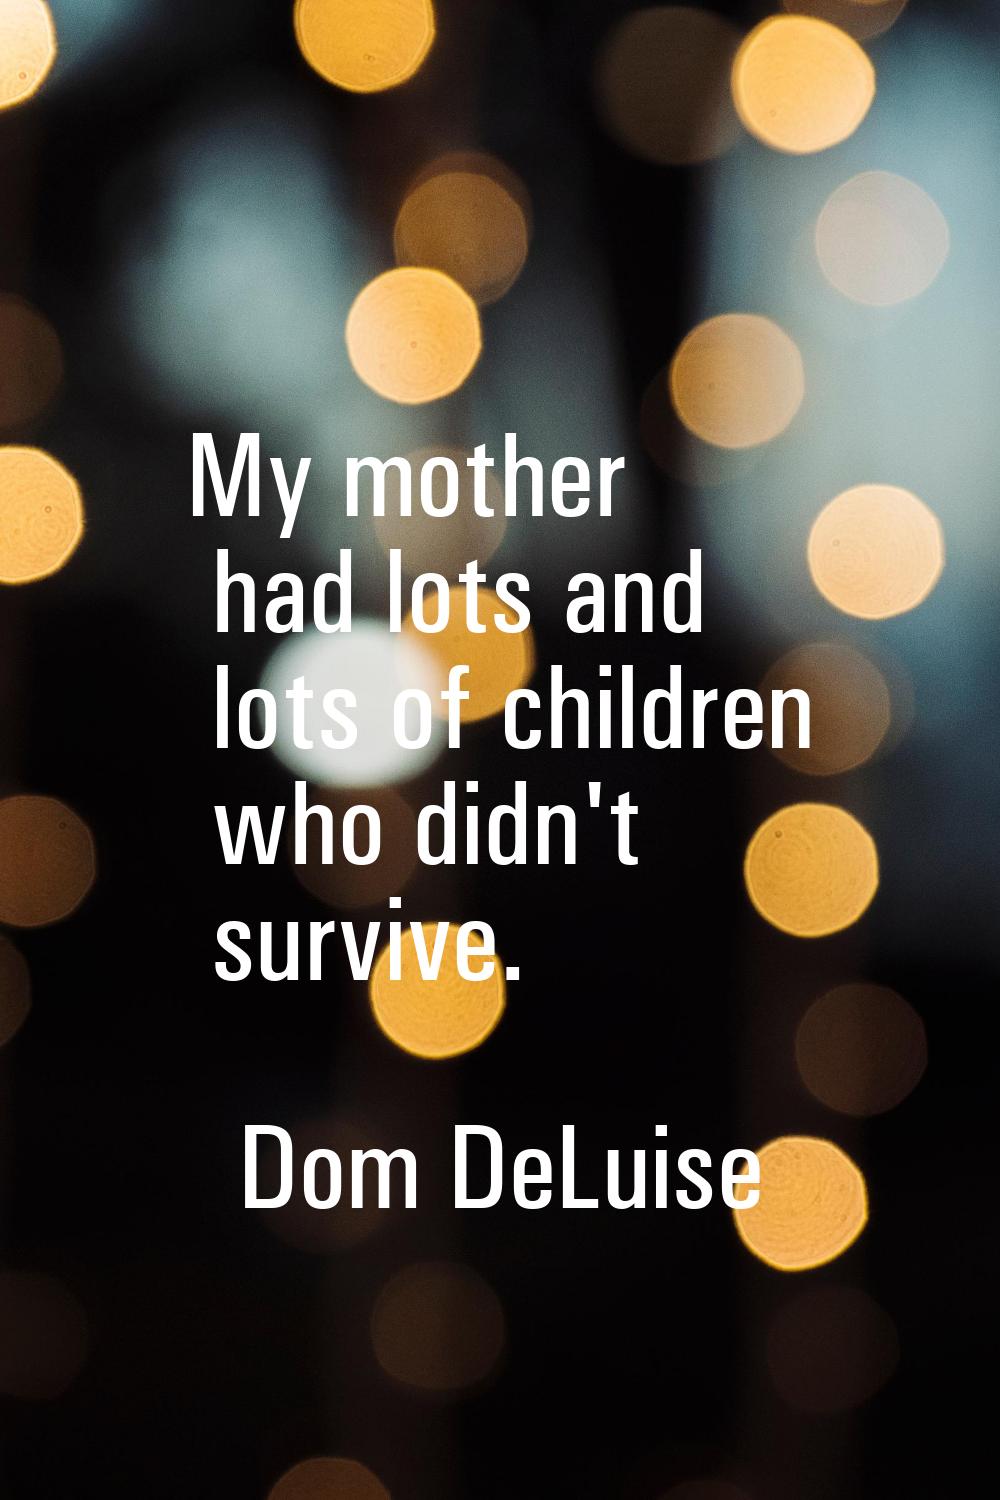 My mother had lots and lots of children who didn't survive.